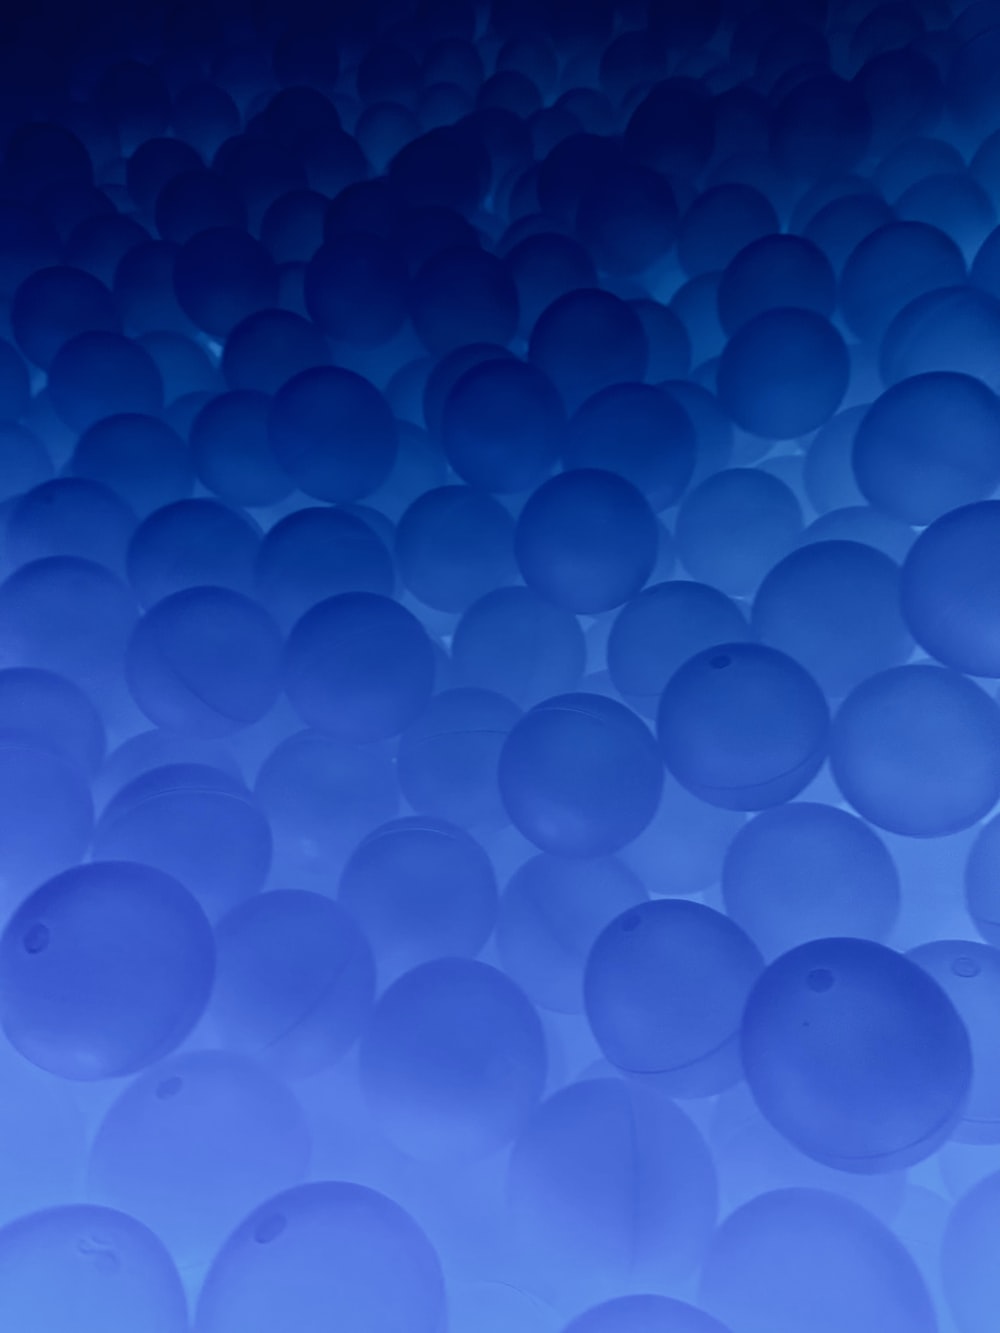 a group of blue balls floating in the air